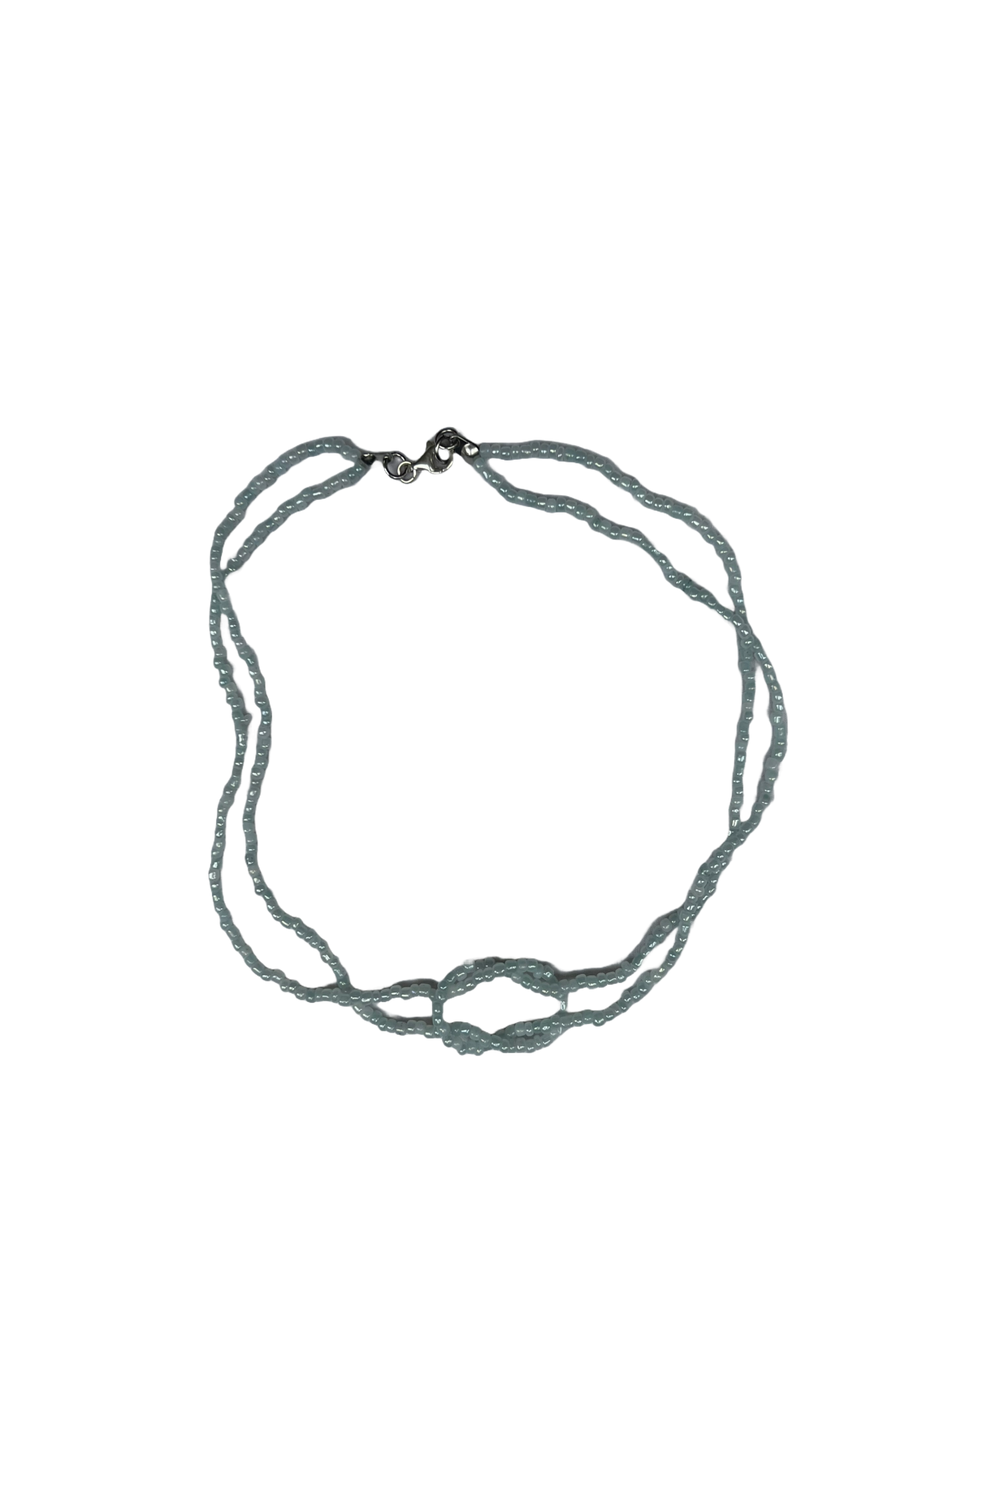 Knotted Choker - Baby Blue